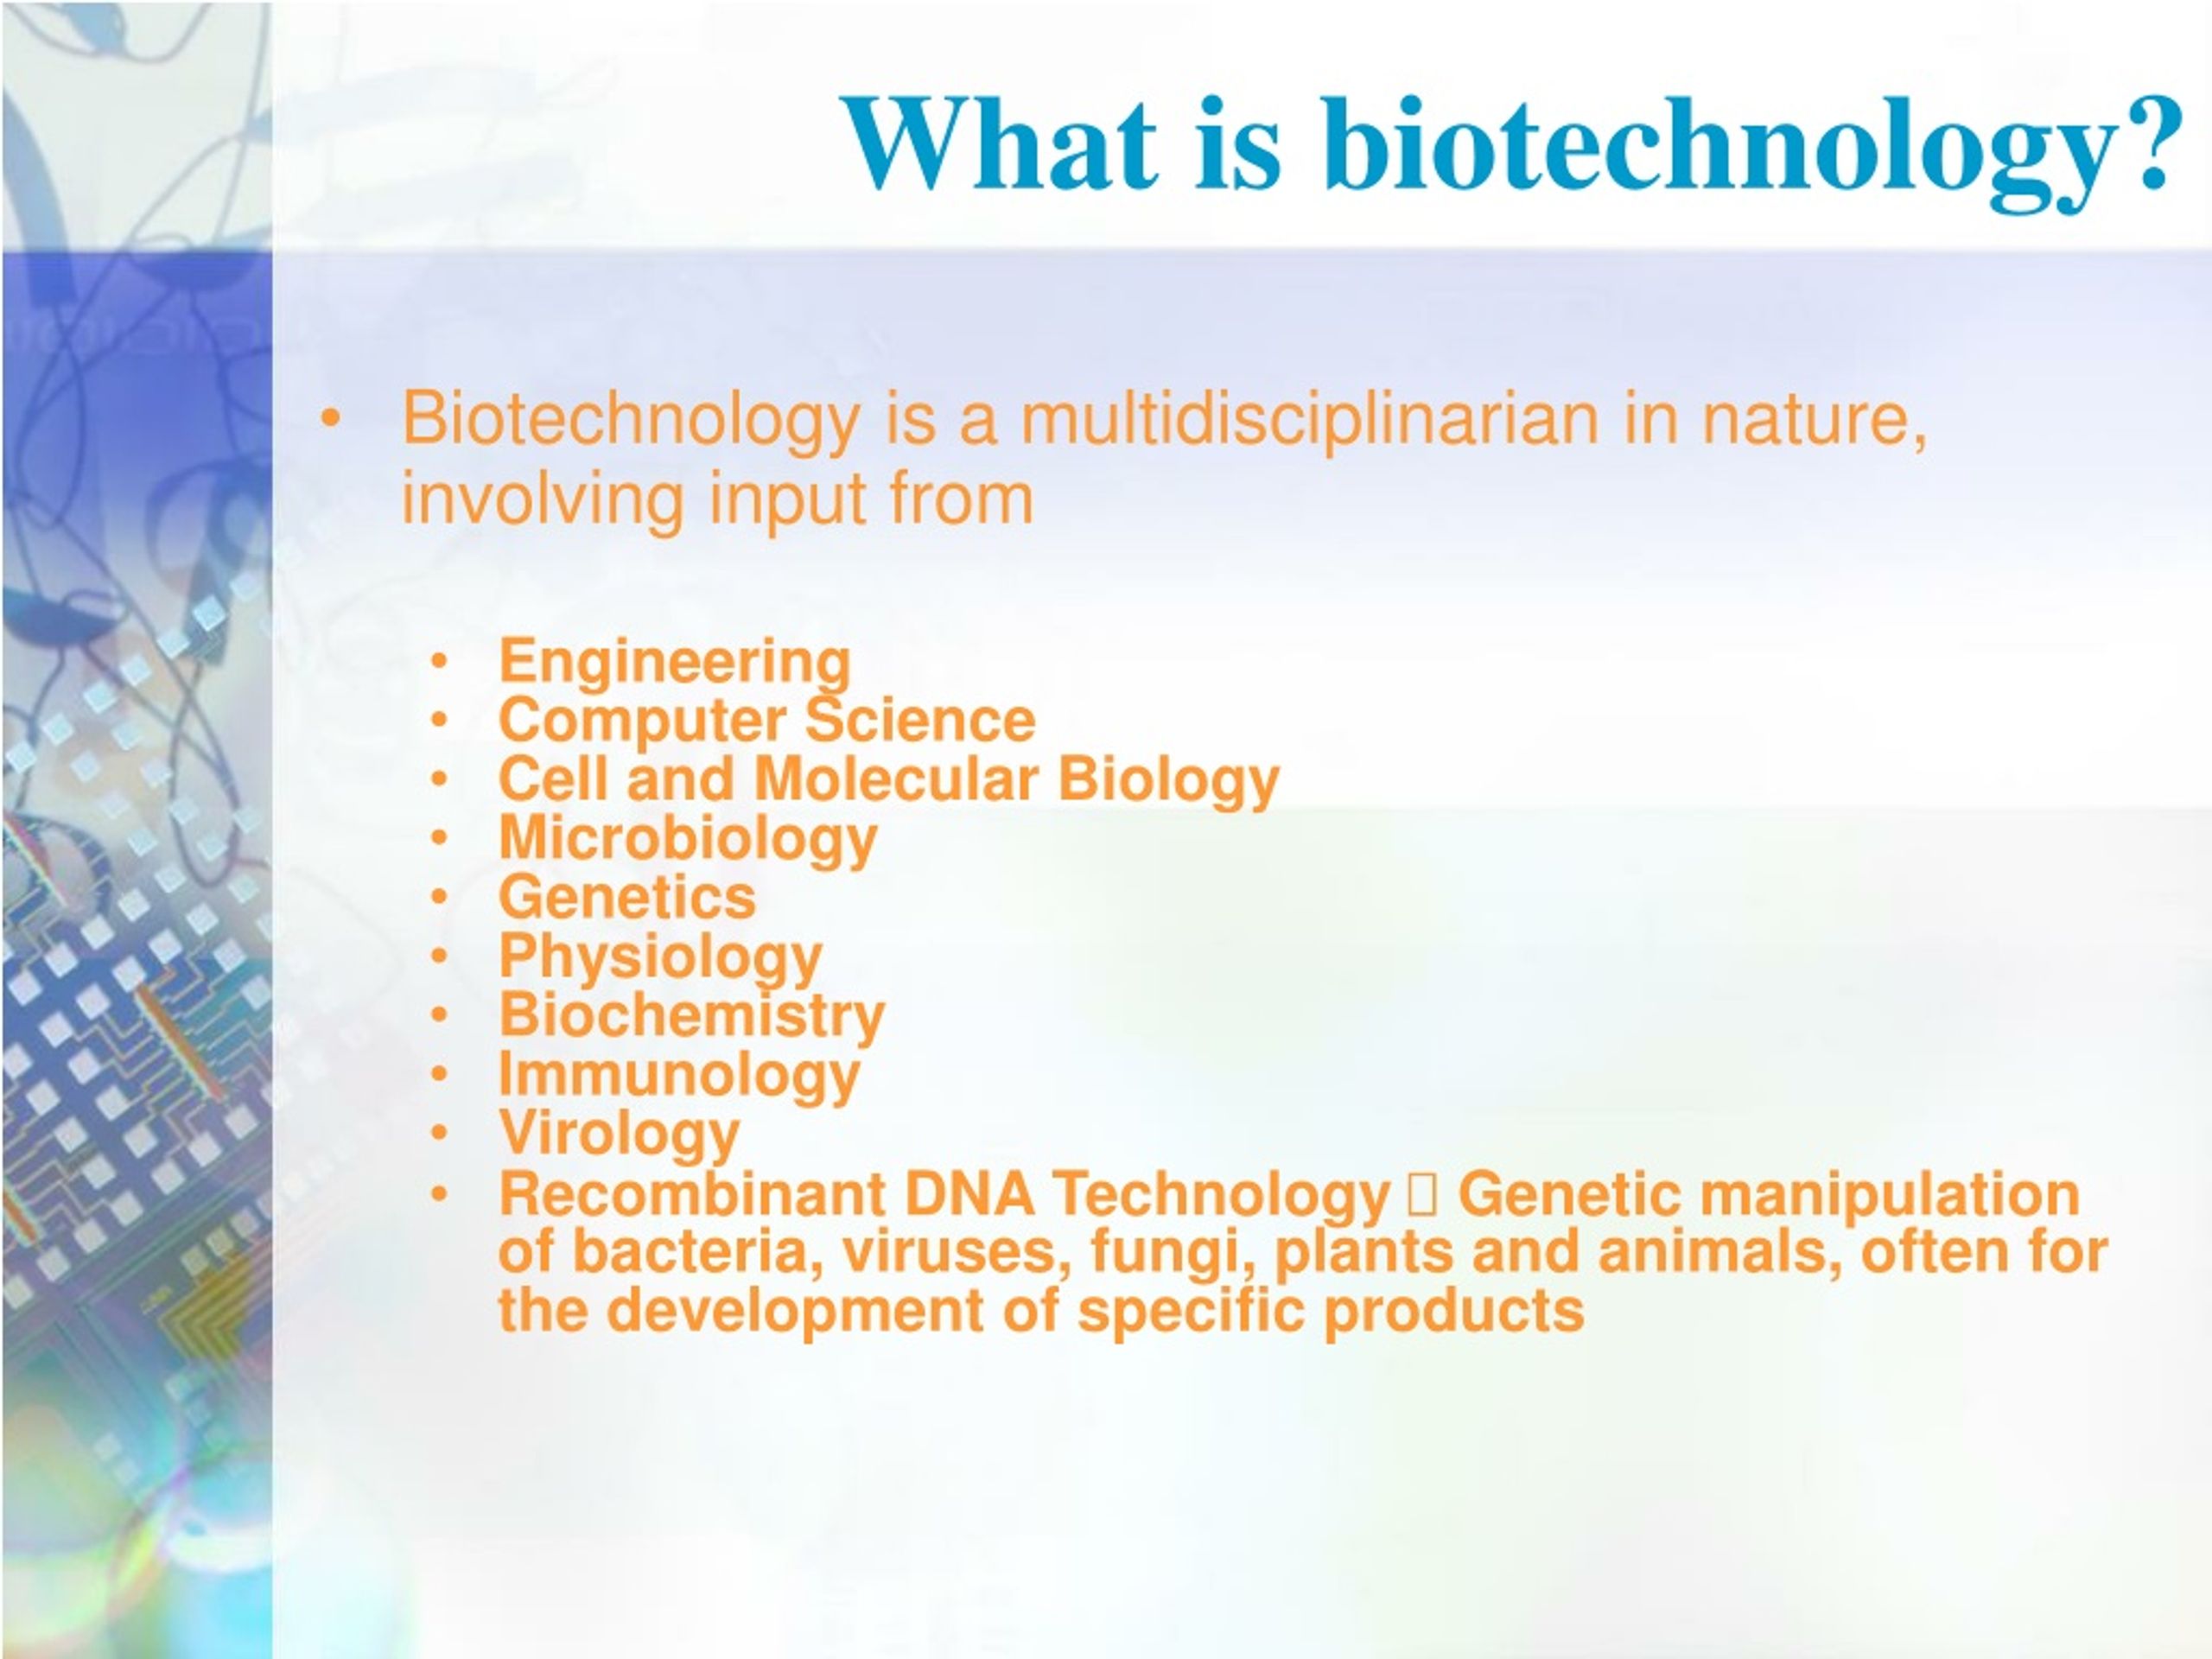 PPT 1. What is Biotechnology? Definitions of Biotechnology Timeline